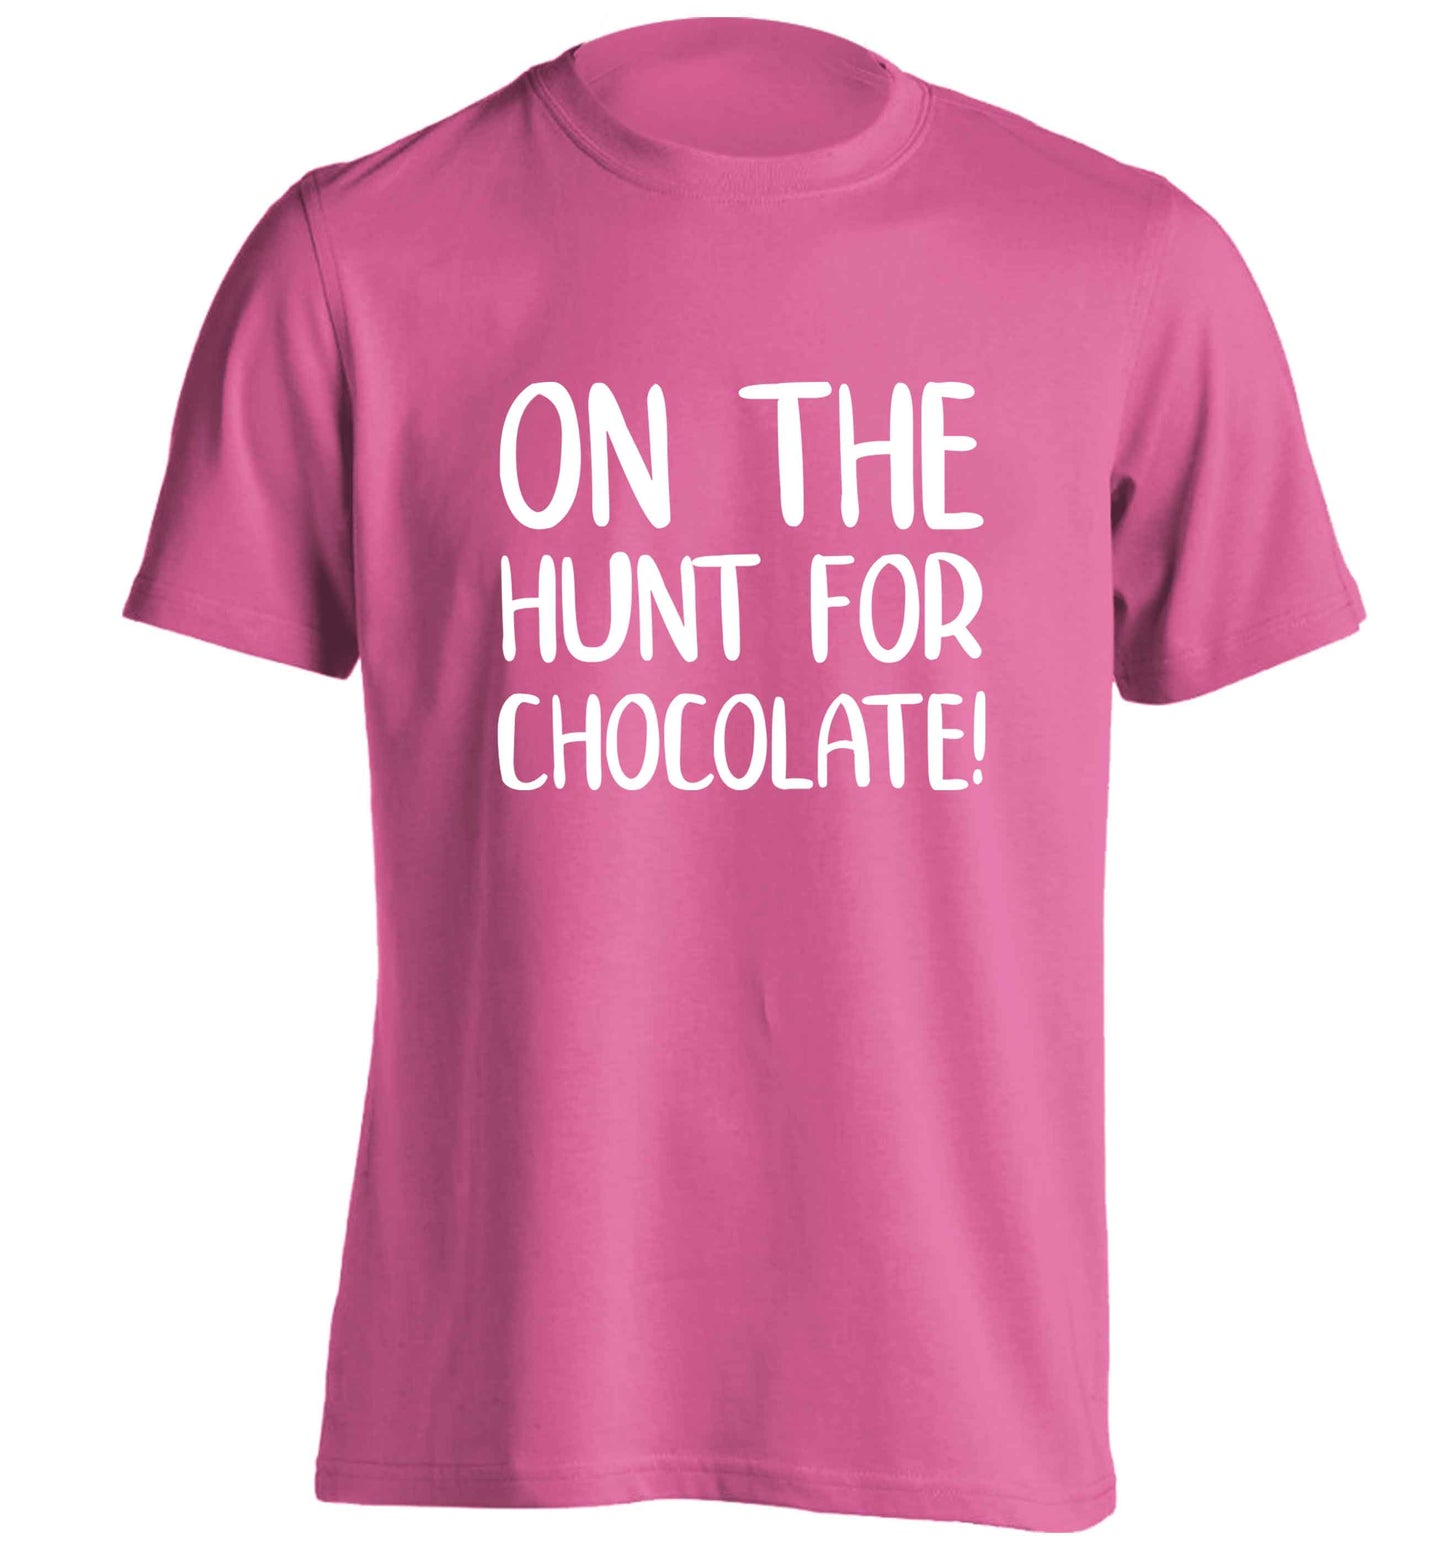 On the hunt for chocolate! adults unisex pink Tshirt 2XL